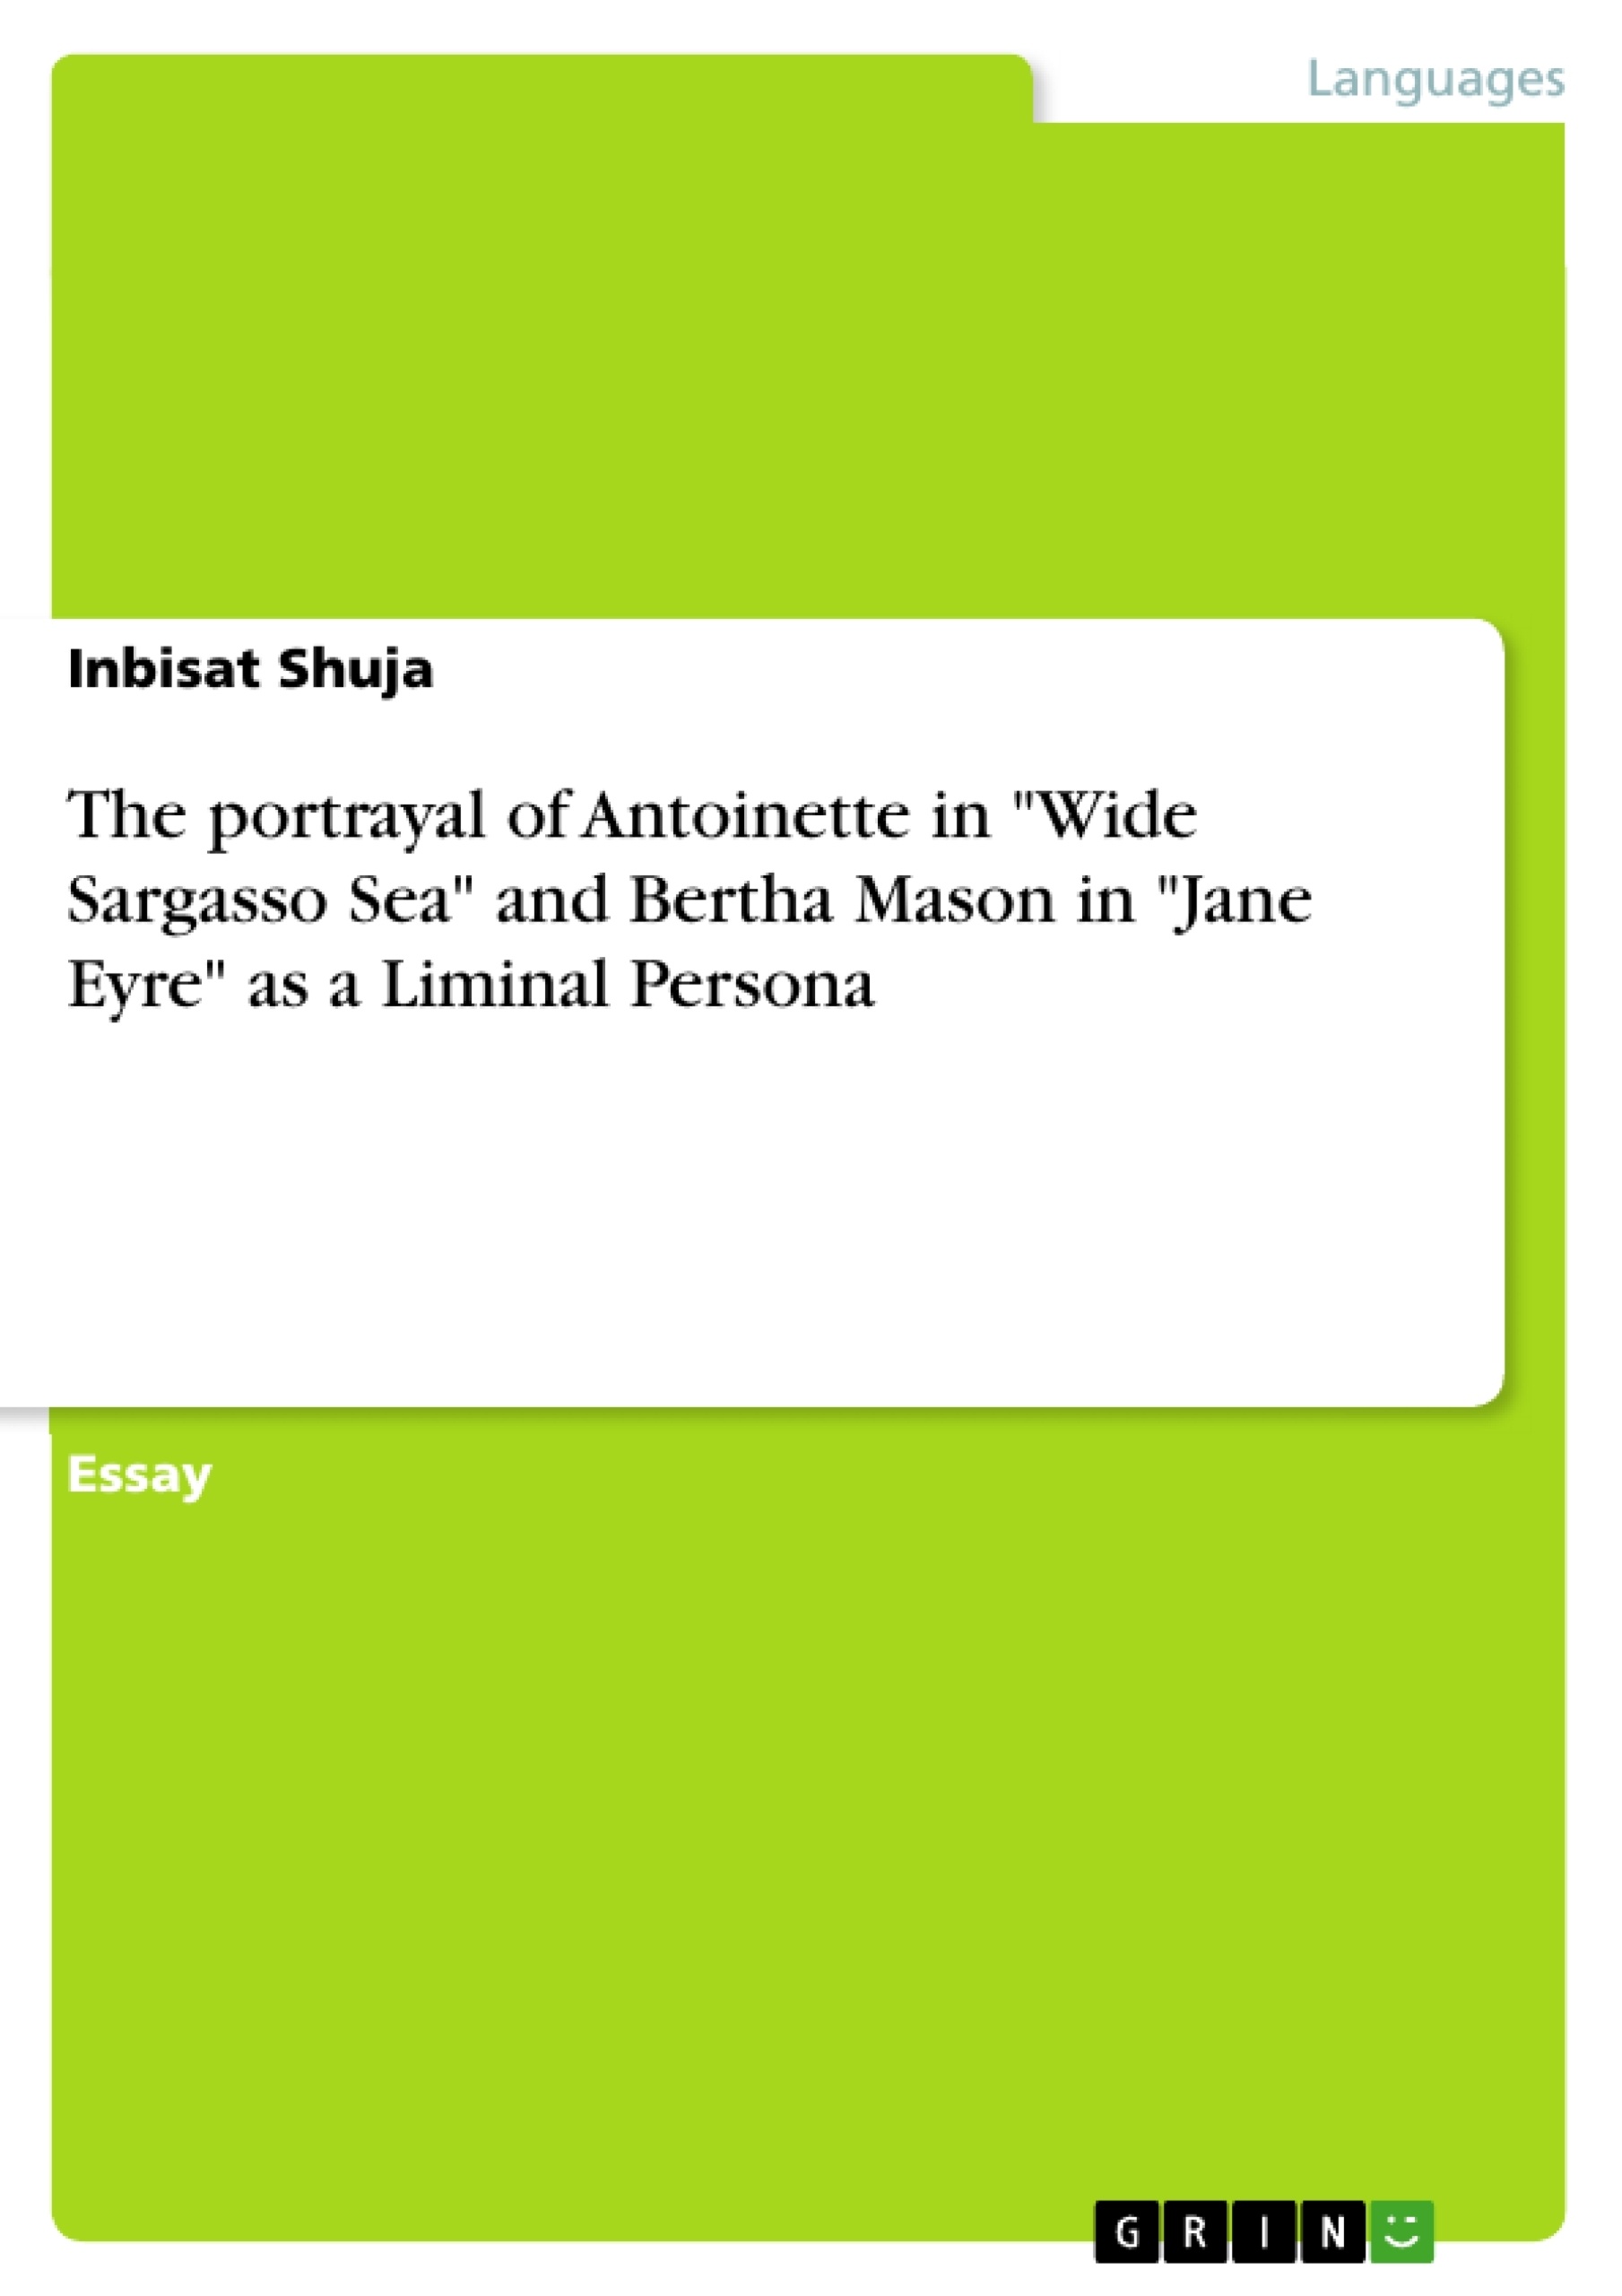 Title: The portrayal of Antoinette in "Wide Sargasso Sea" and Bertha Mason in "Jane Eyre" as a Liminal Persona